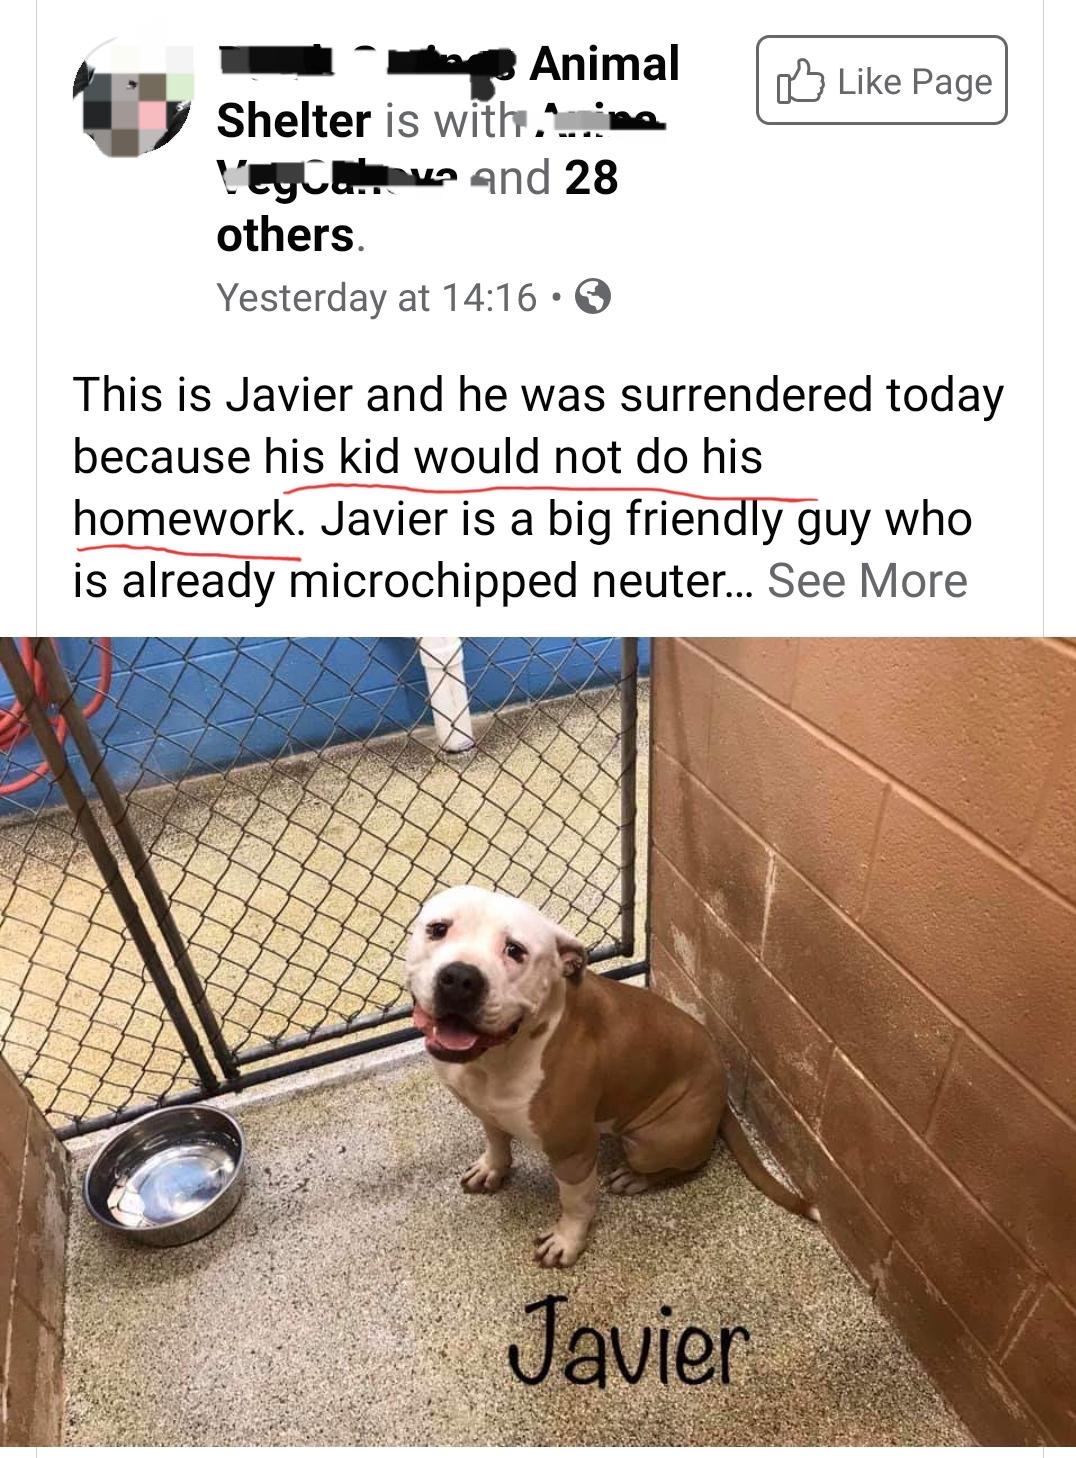 dog - Page Animal Shelter is with mimo l'Gyuu. 1 and 28 others. Yesterday at This is Javier and he was surrendered today because his kid would not do his homework. Javier is a big friendly guy who is already microchipped neuter... See More Javier